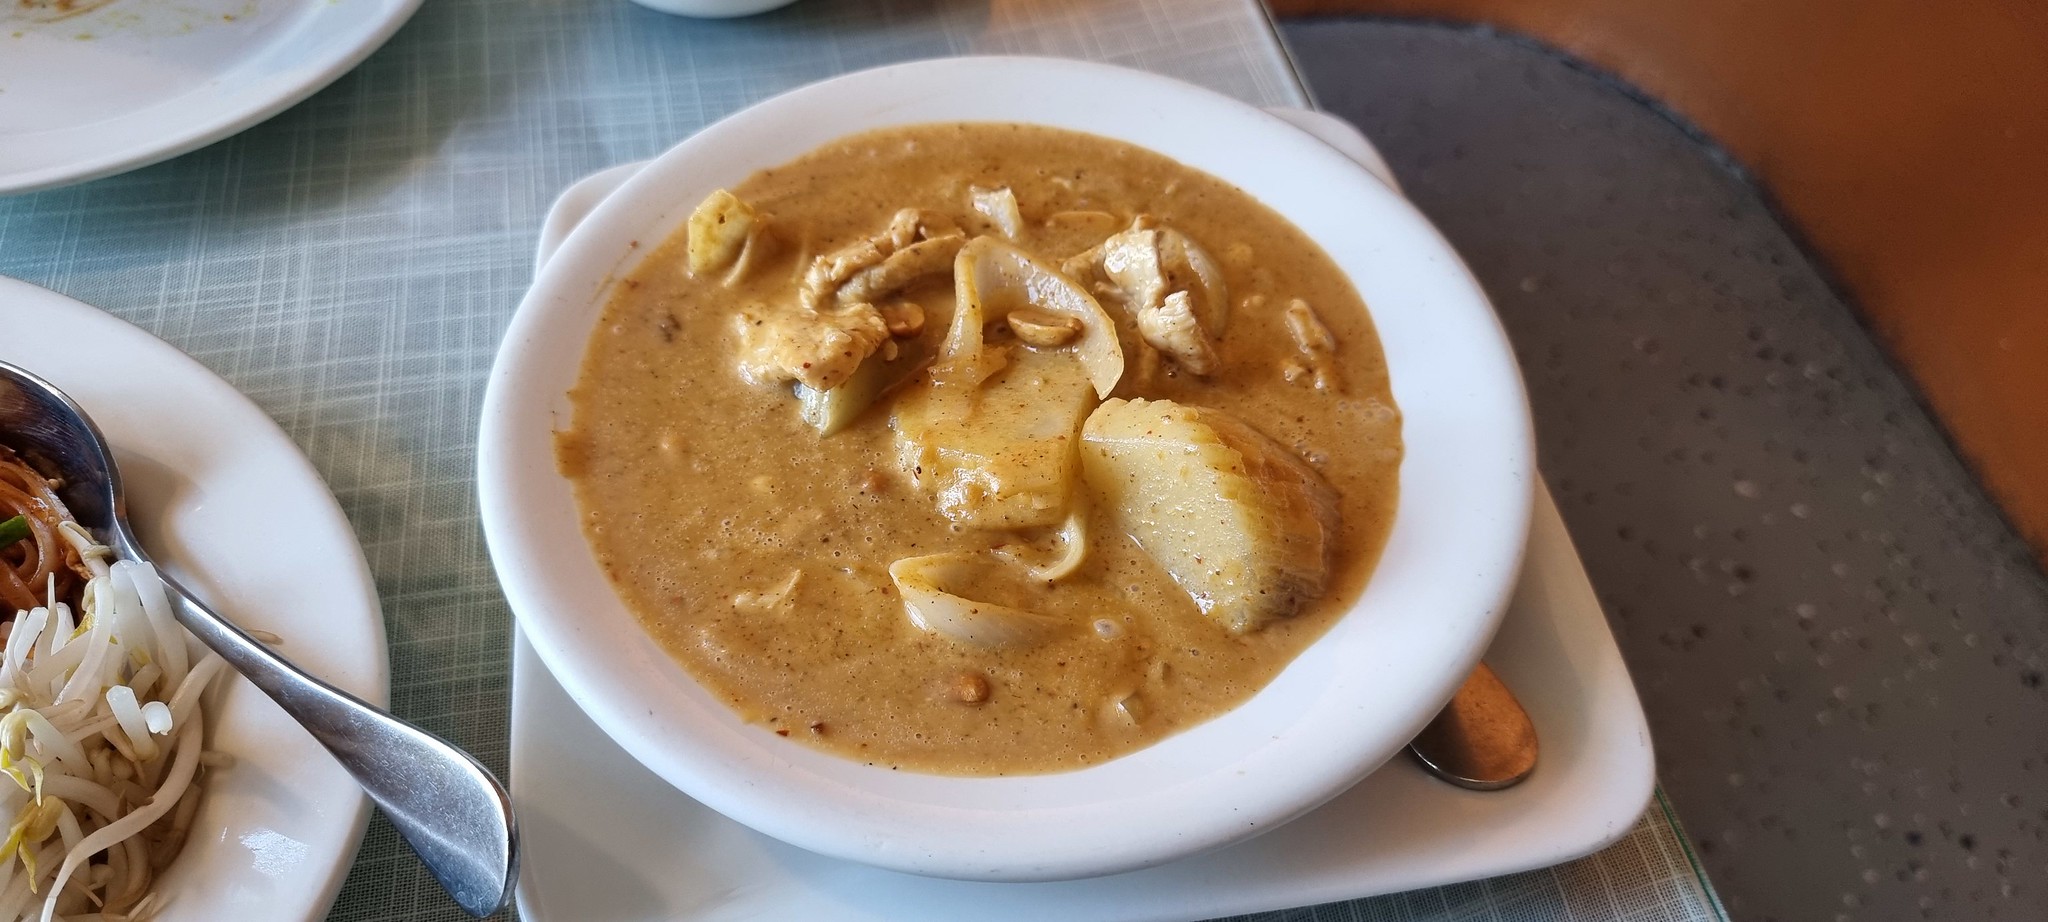 The massaman curry at Talay Thai in Rancho Mirage